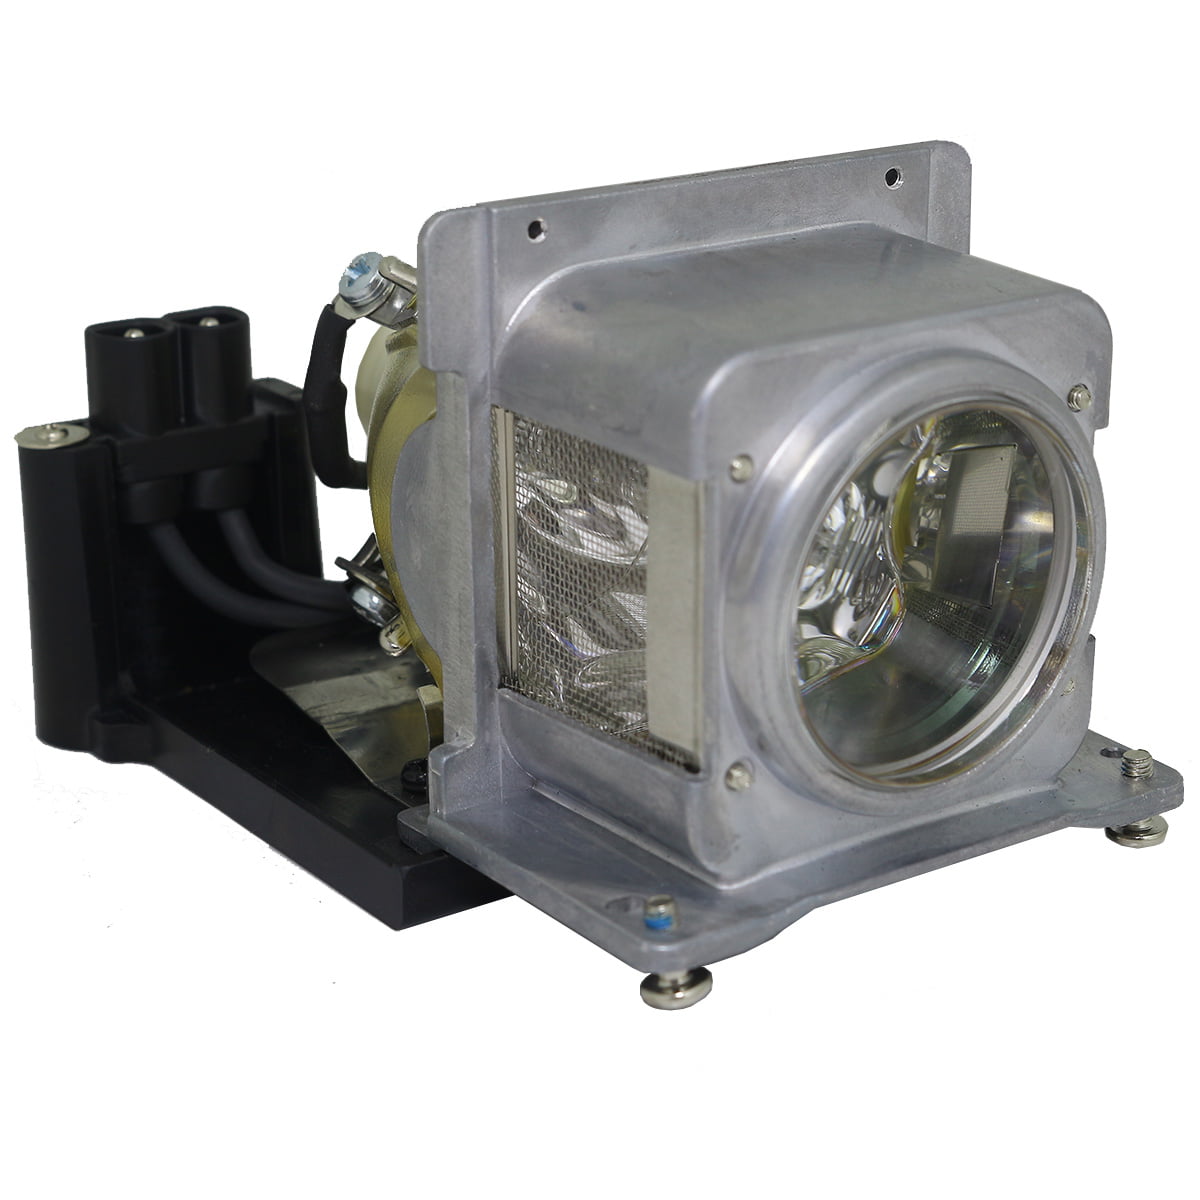 Lutema Platinum for Sanyo PLC-WXU10 Projector Lamp with Housing Original Philips Bulb Inside